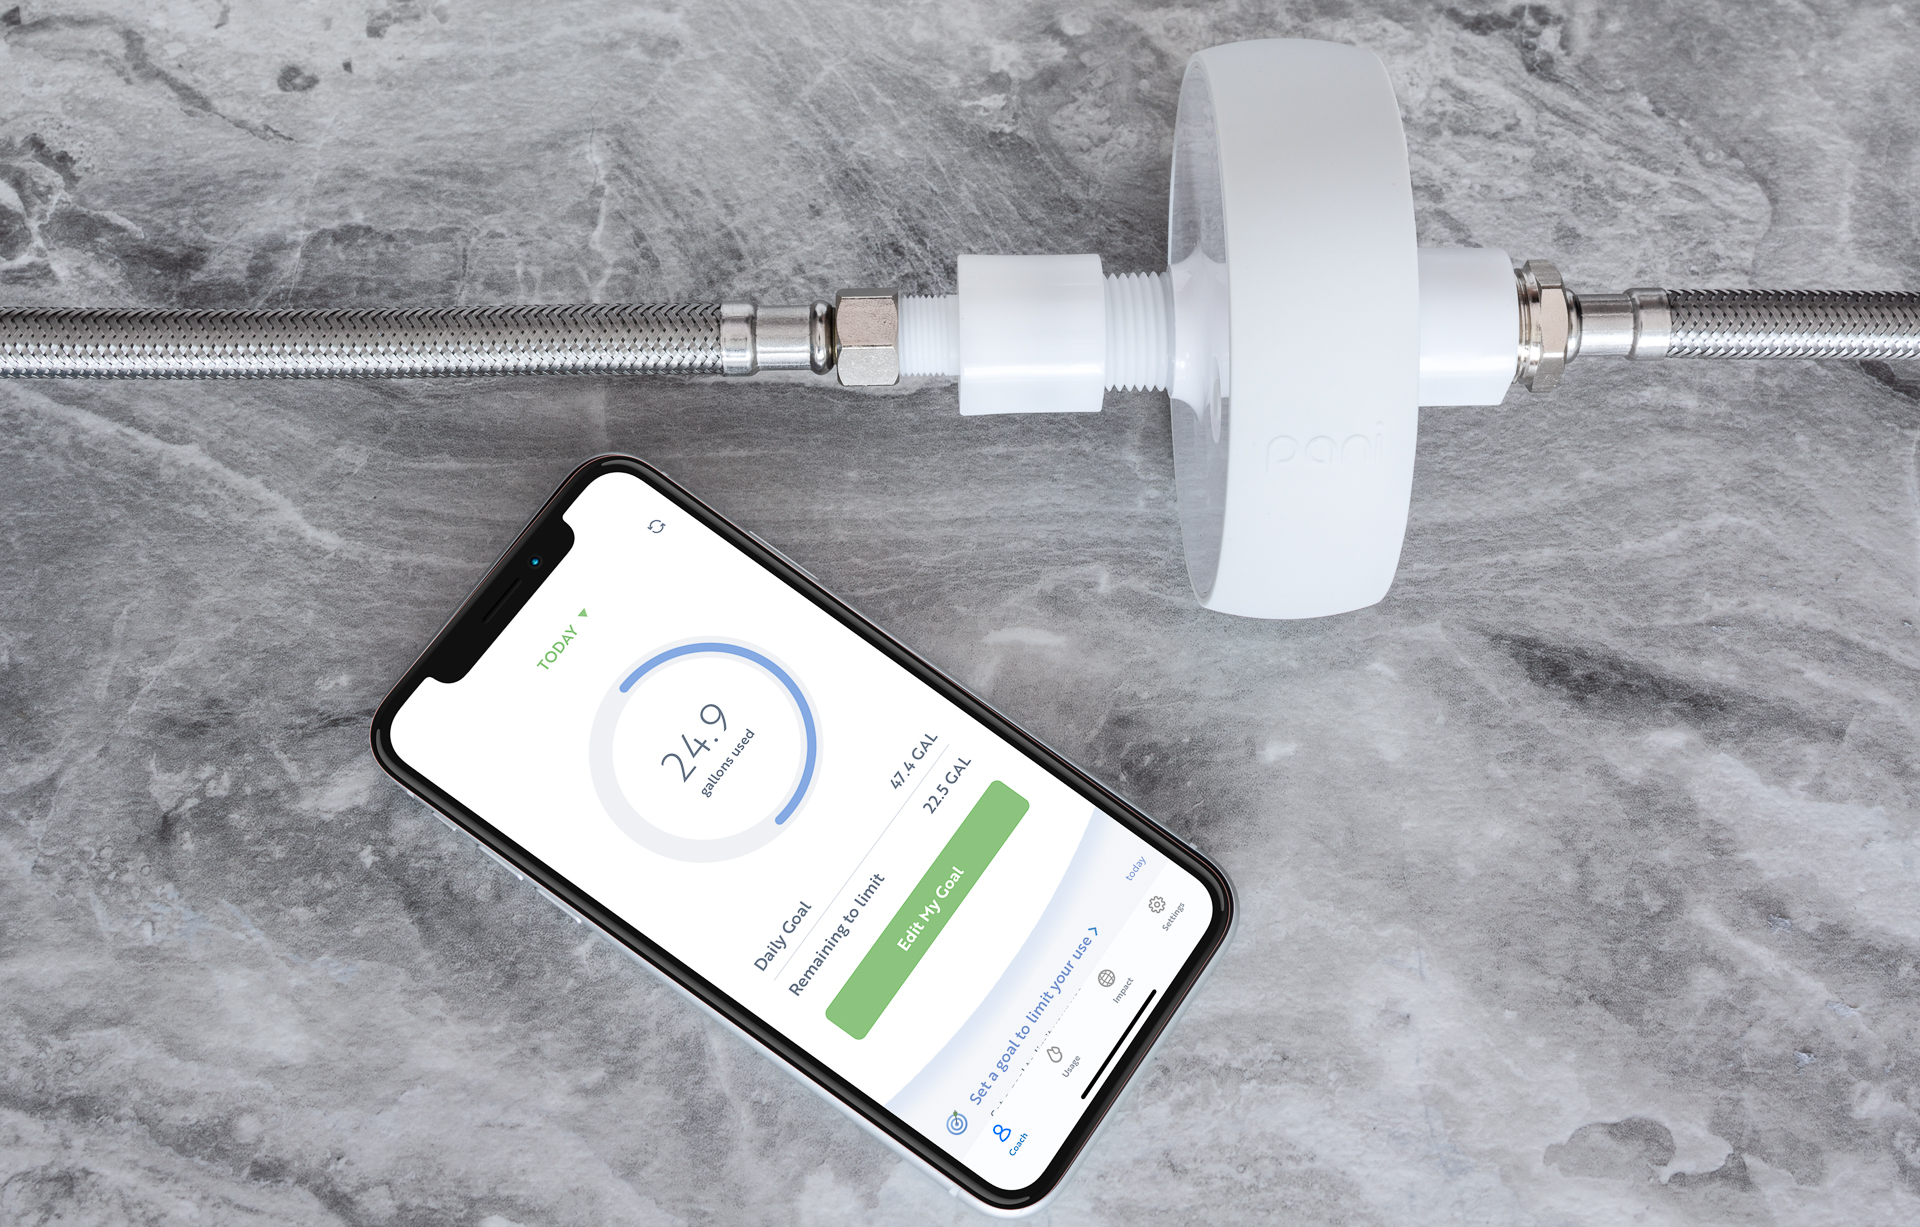 Smart water devices, such as the Pani Smart Water Monitor, can add significant assurance against leaks in your home. Image: Digitized House Media.